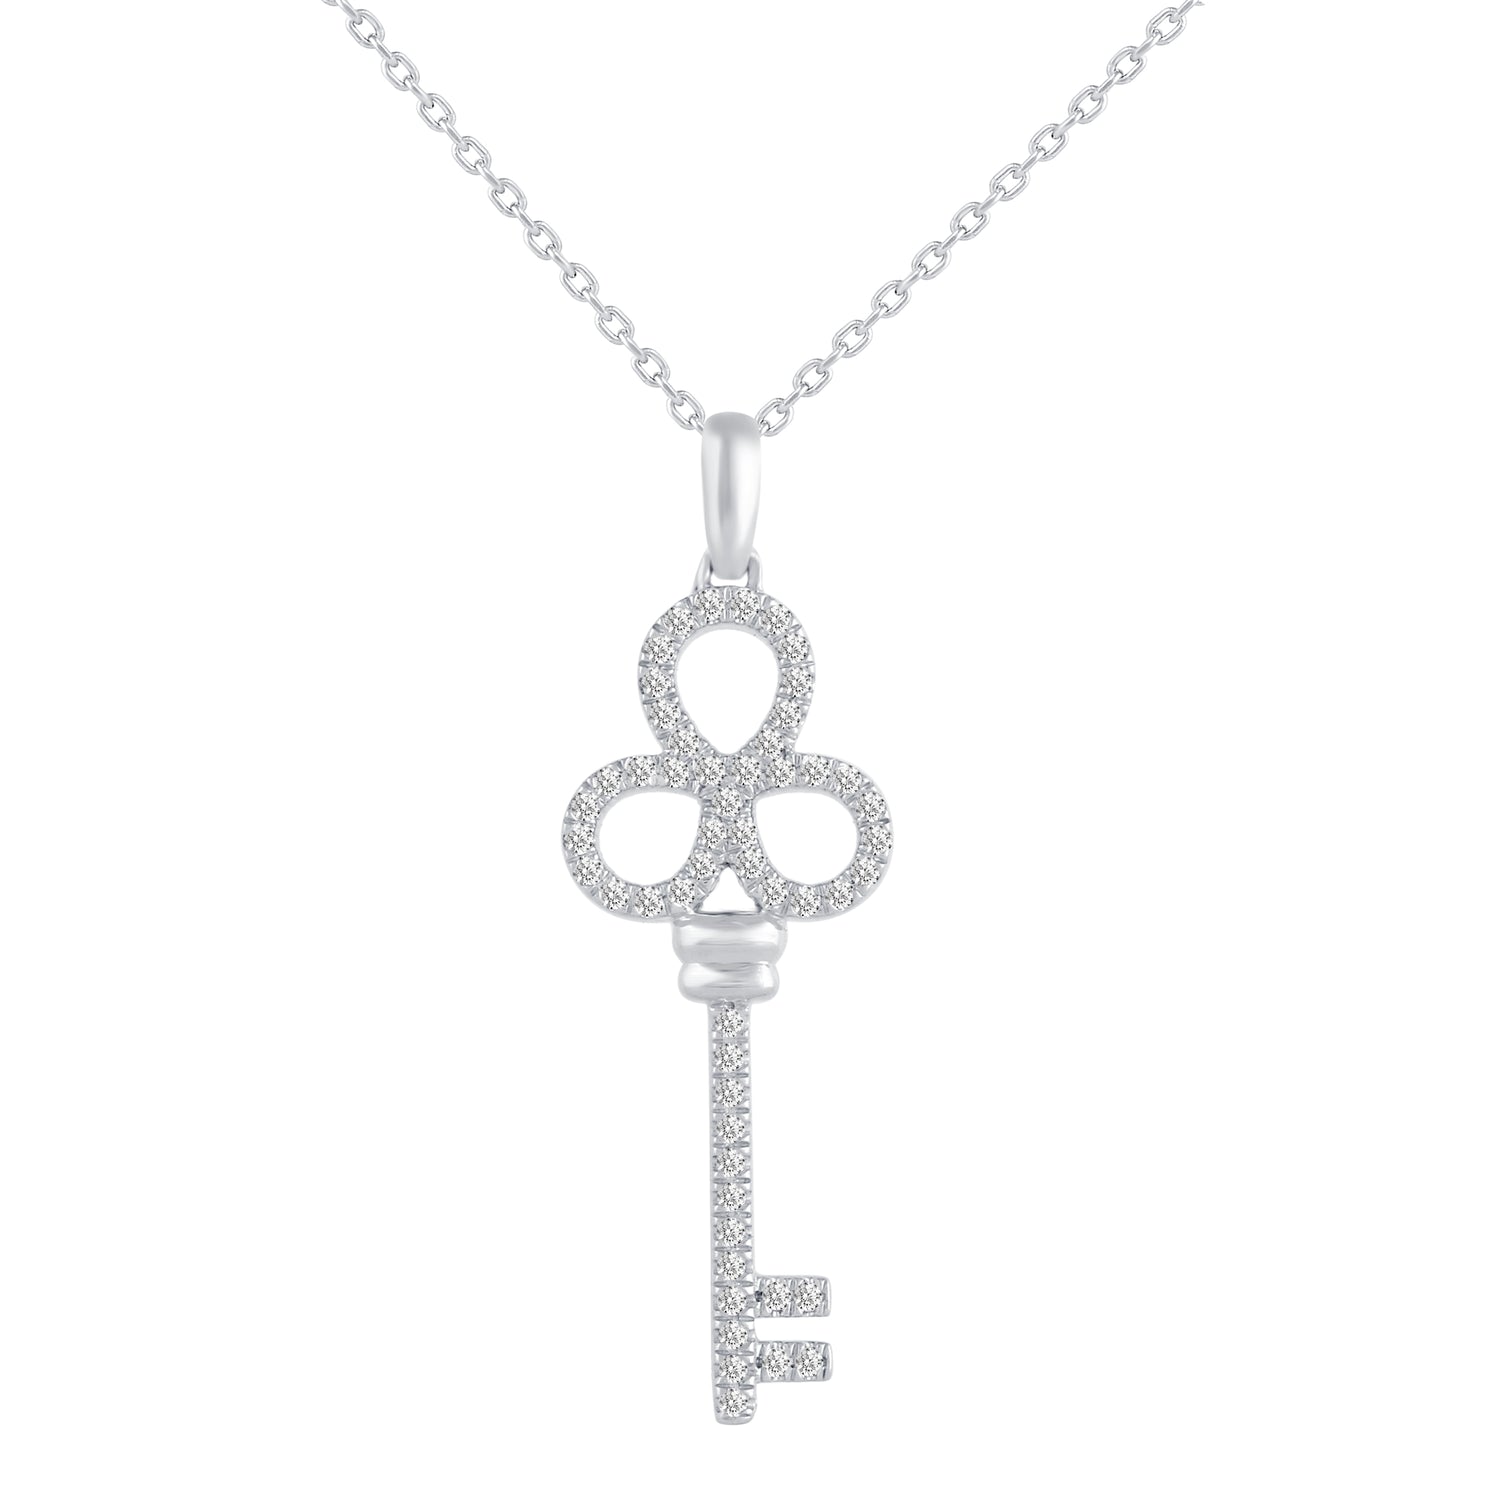 1/4 Cttw Diamond Pave Clover Key Pendant Necklace set in 925 Sterling Silver